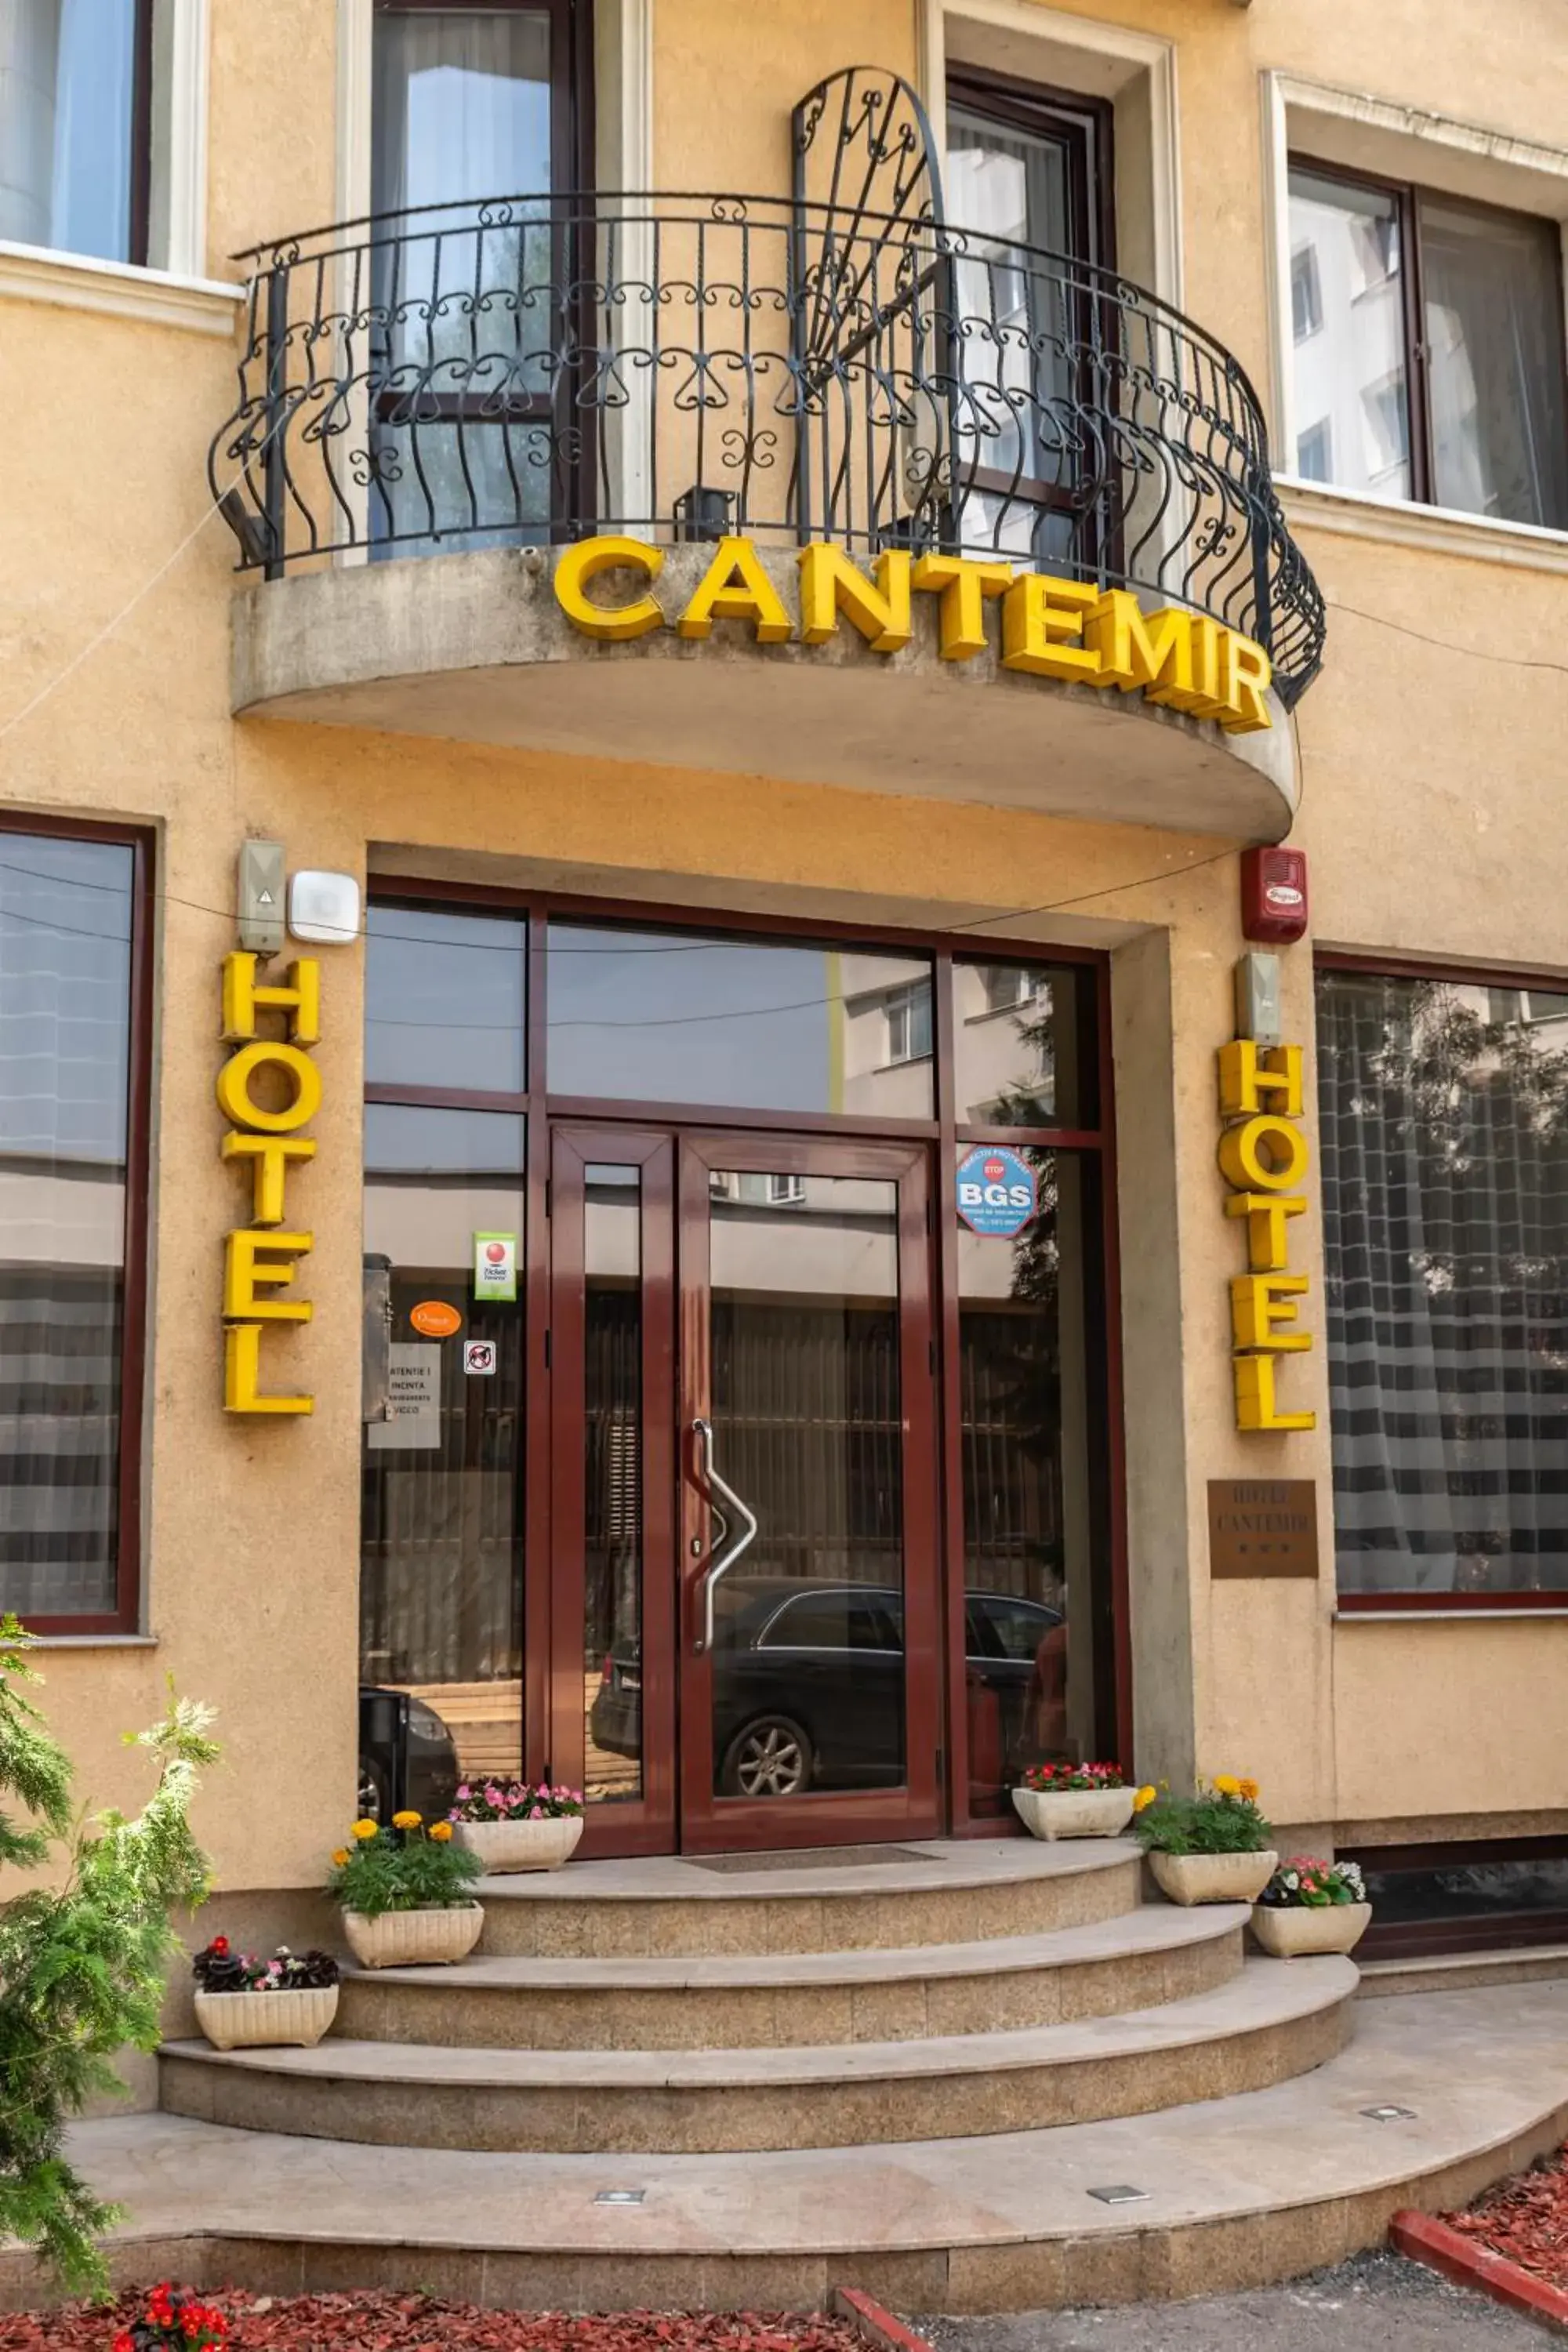 Property building in Hotel Cantemir